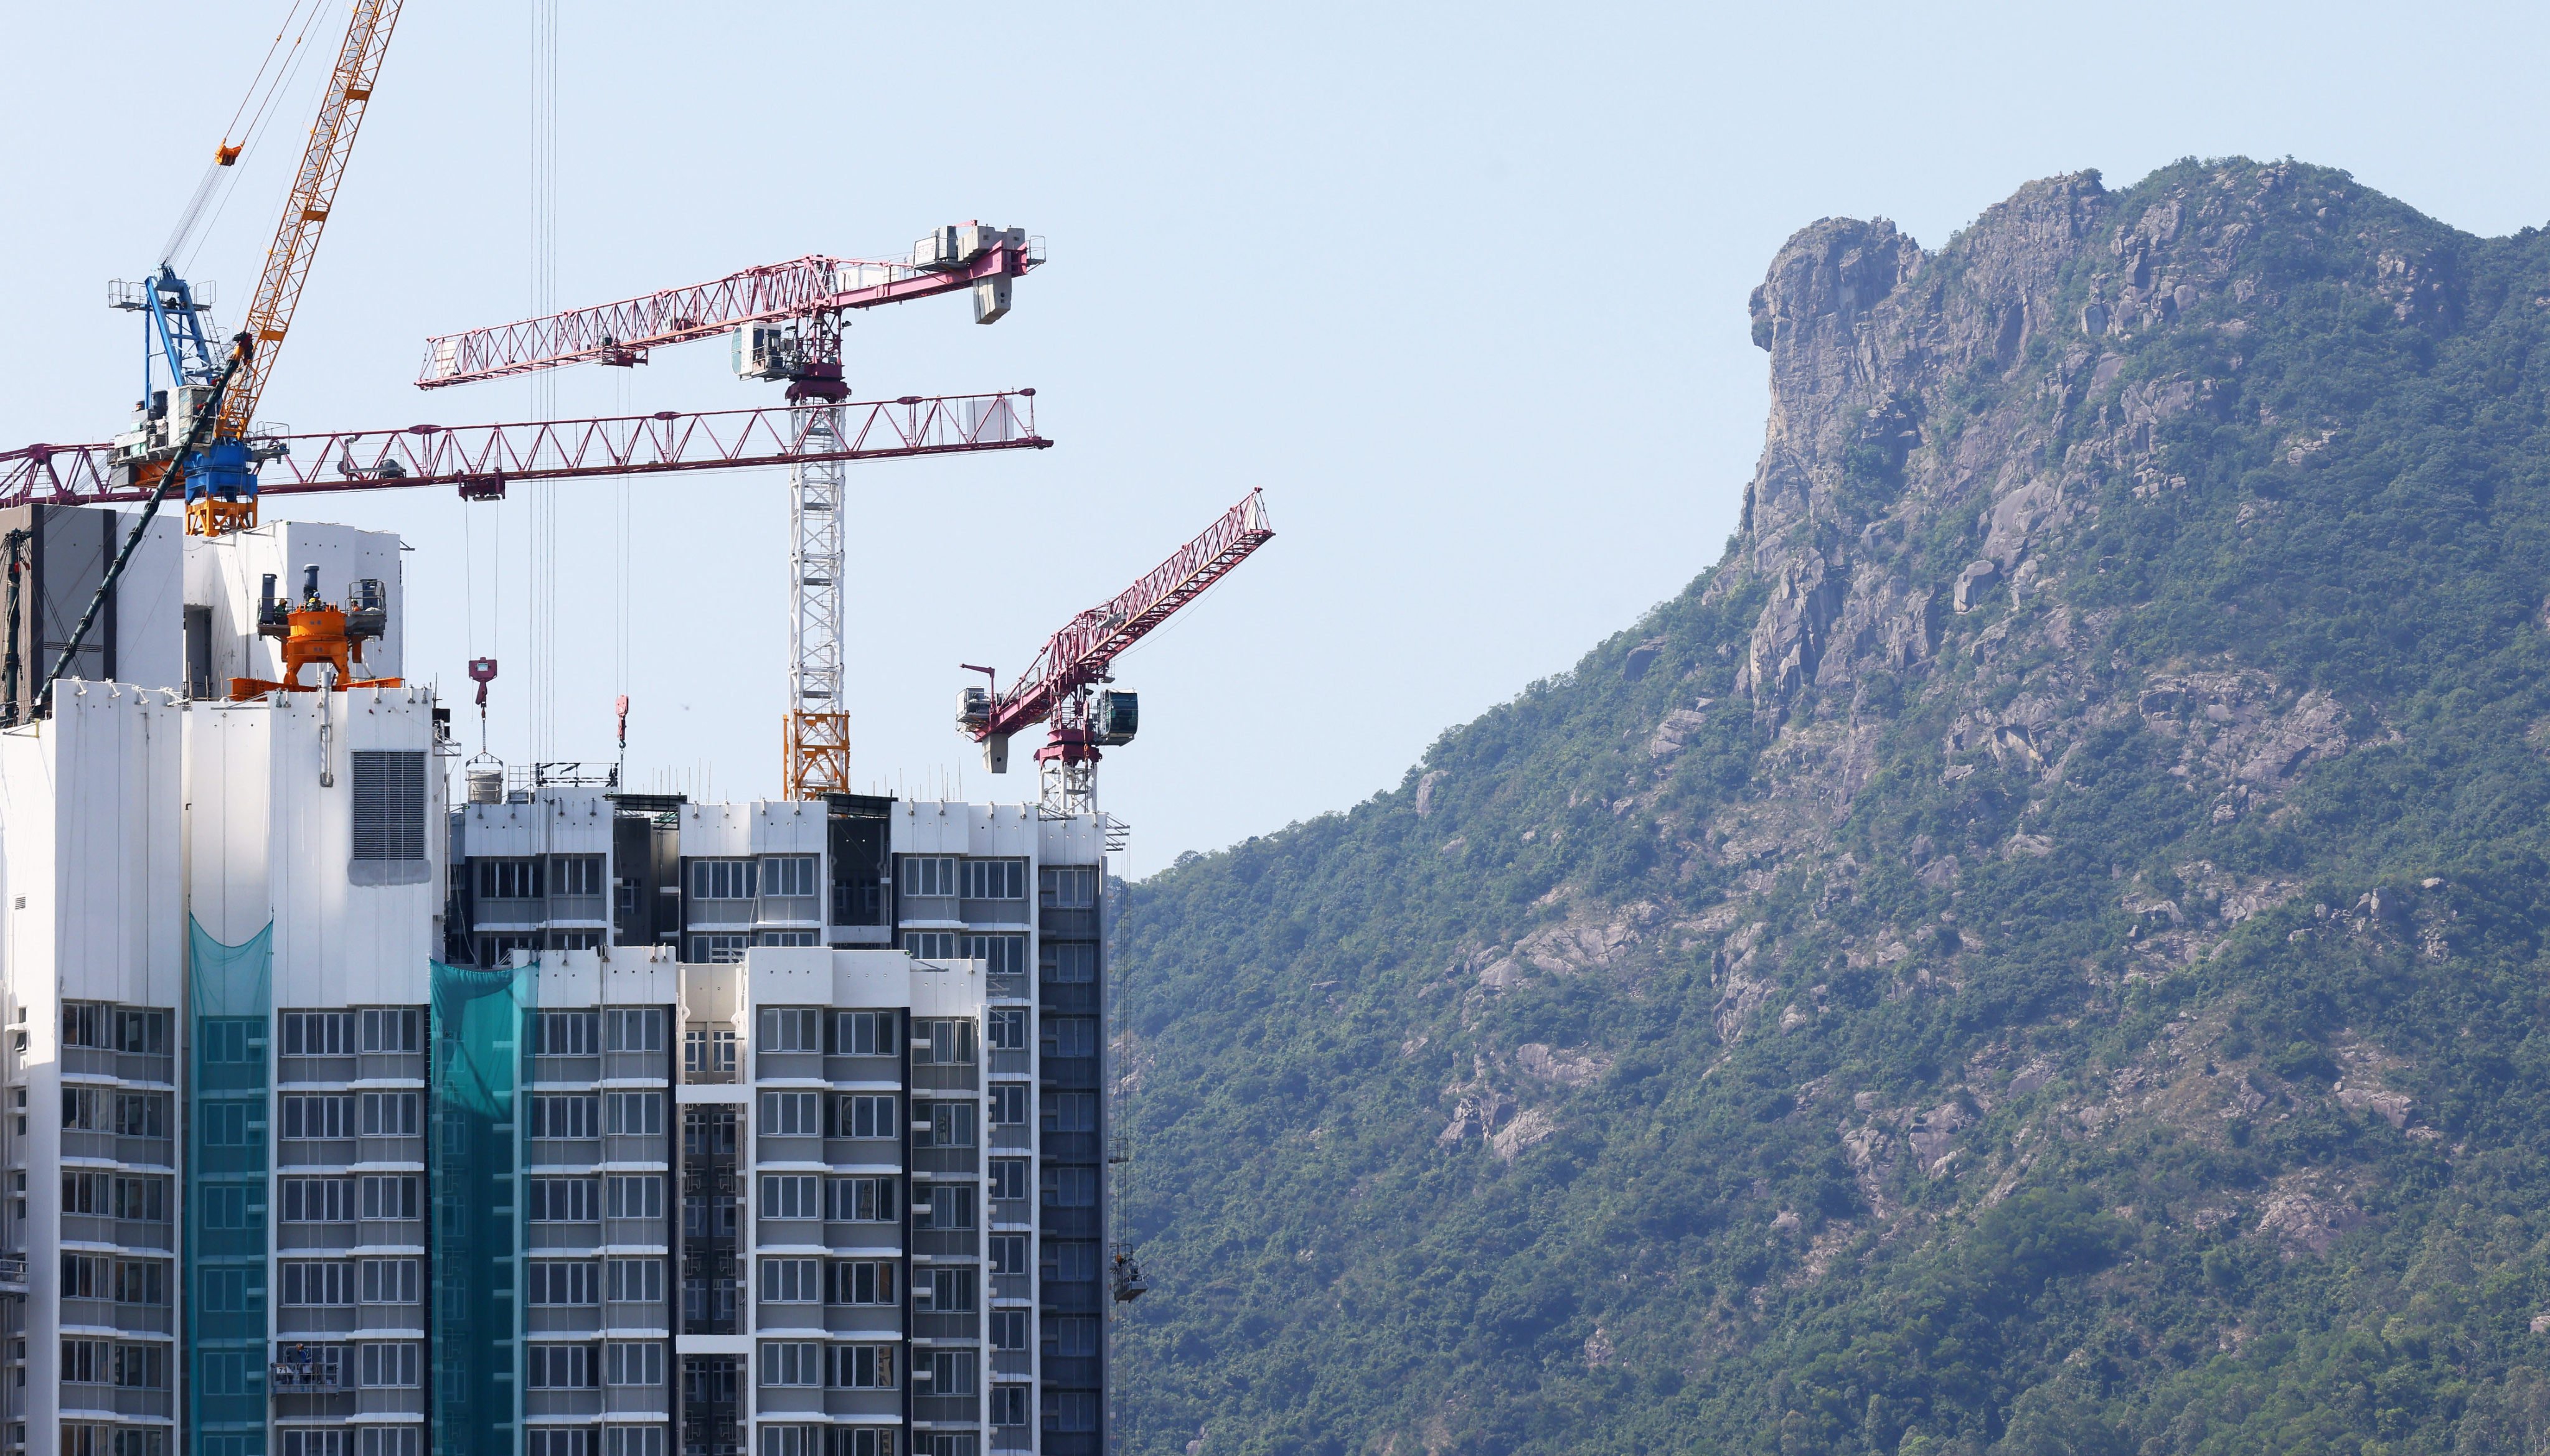 Flats under construction, with Lion Rock in the background, on October 11. Photo: Dickson Lee